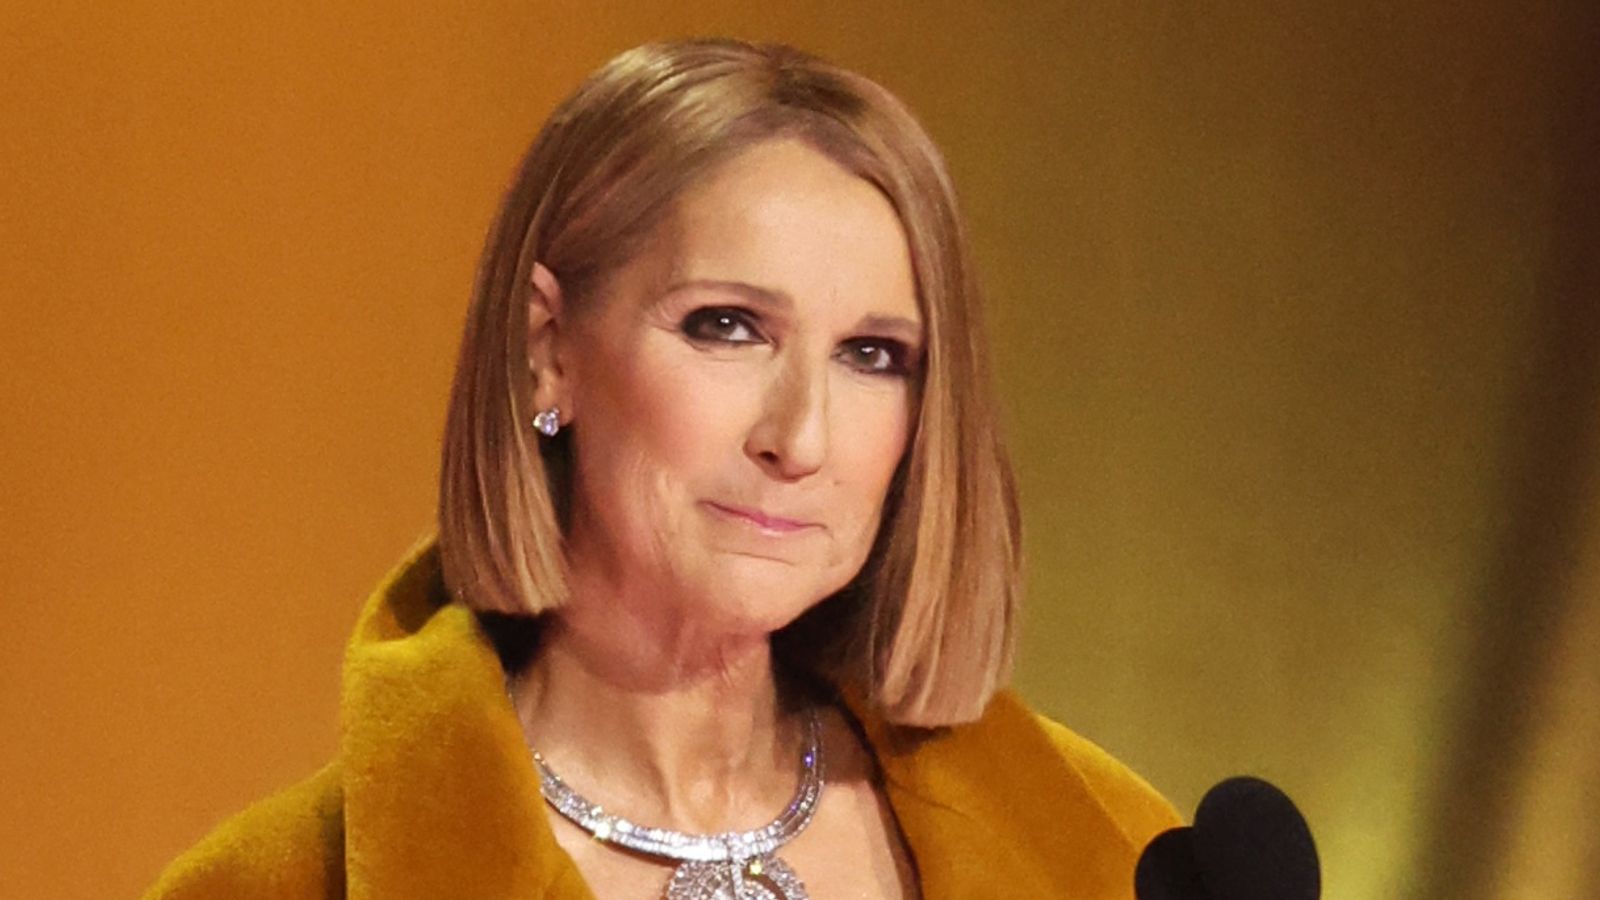 Celine Dion took life-threatening doses of Valium to ease muscle spasms